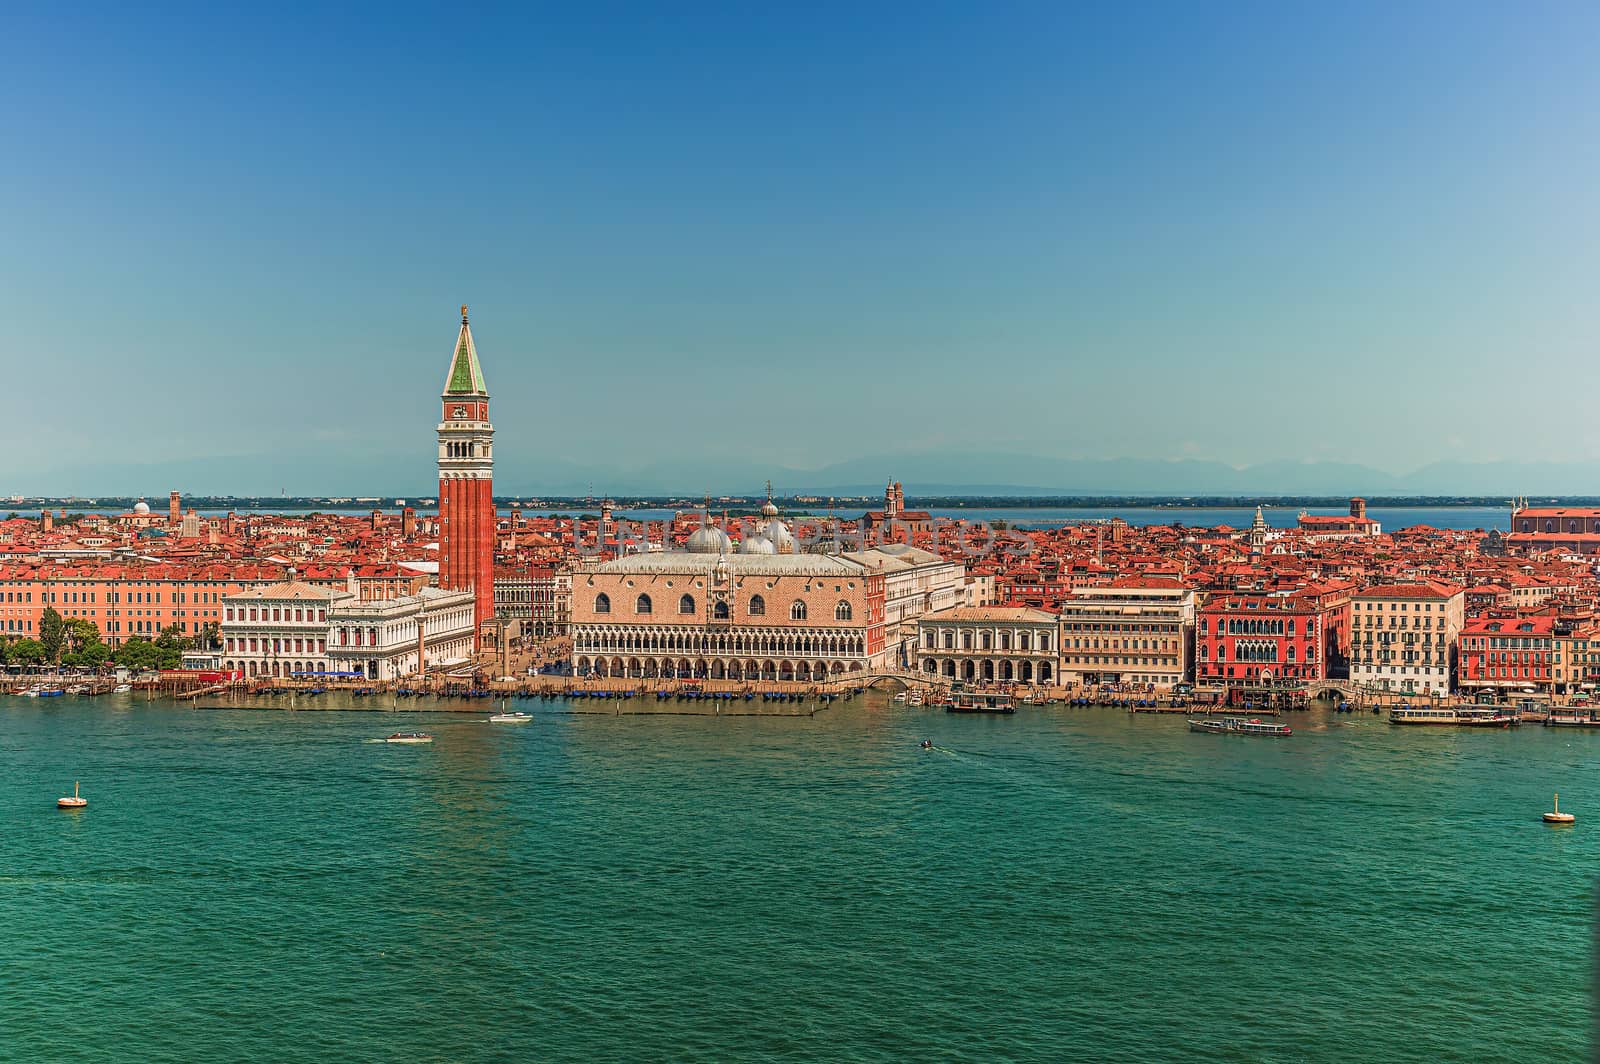 The famous San Marco Campanile and the Doges Palace in front of the Grand Canal in Venice on sunny day in north Italy